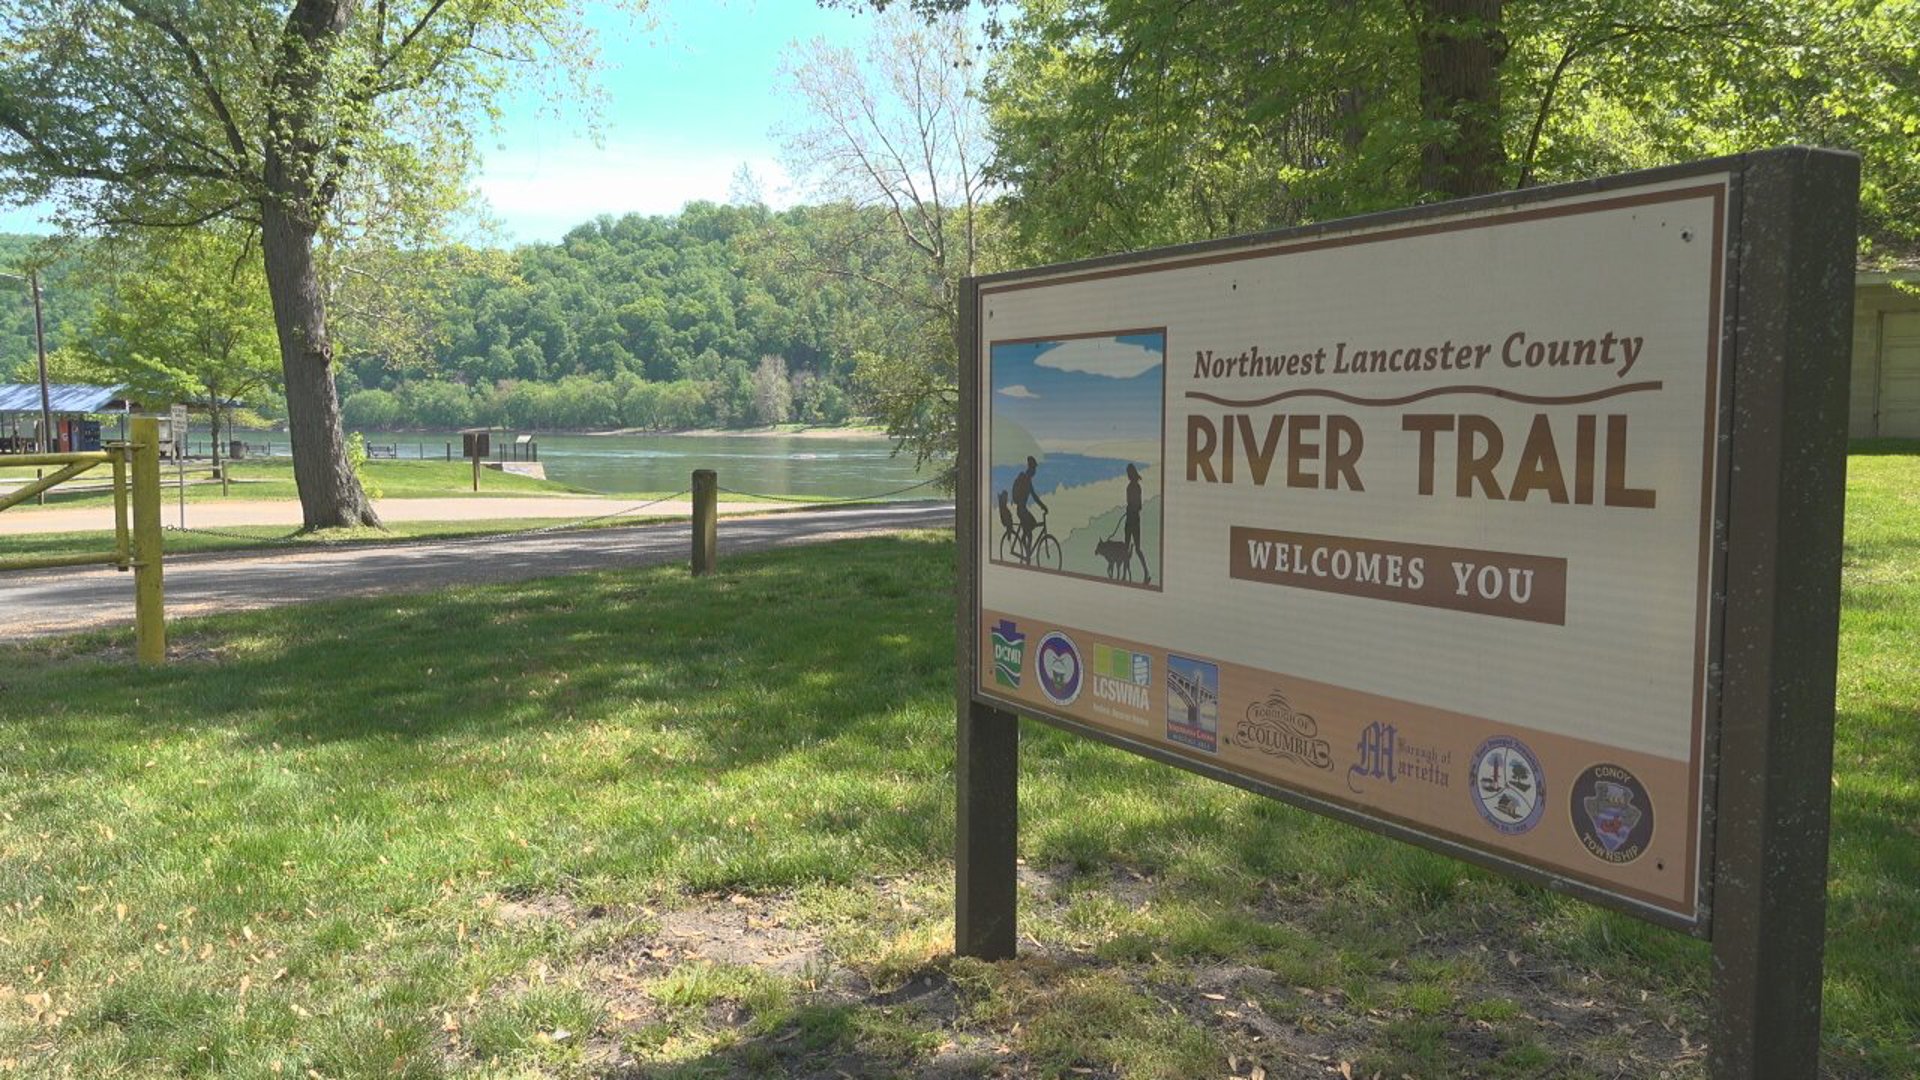 From kayaking and biking to bird watching and history, the Northwest River Trail in Lancaster County has no shortage of outdoor activities to take part in.